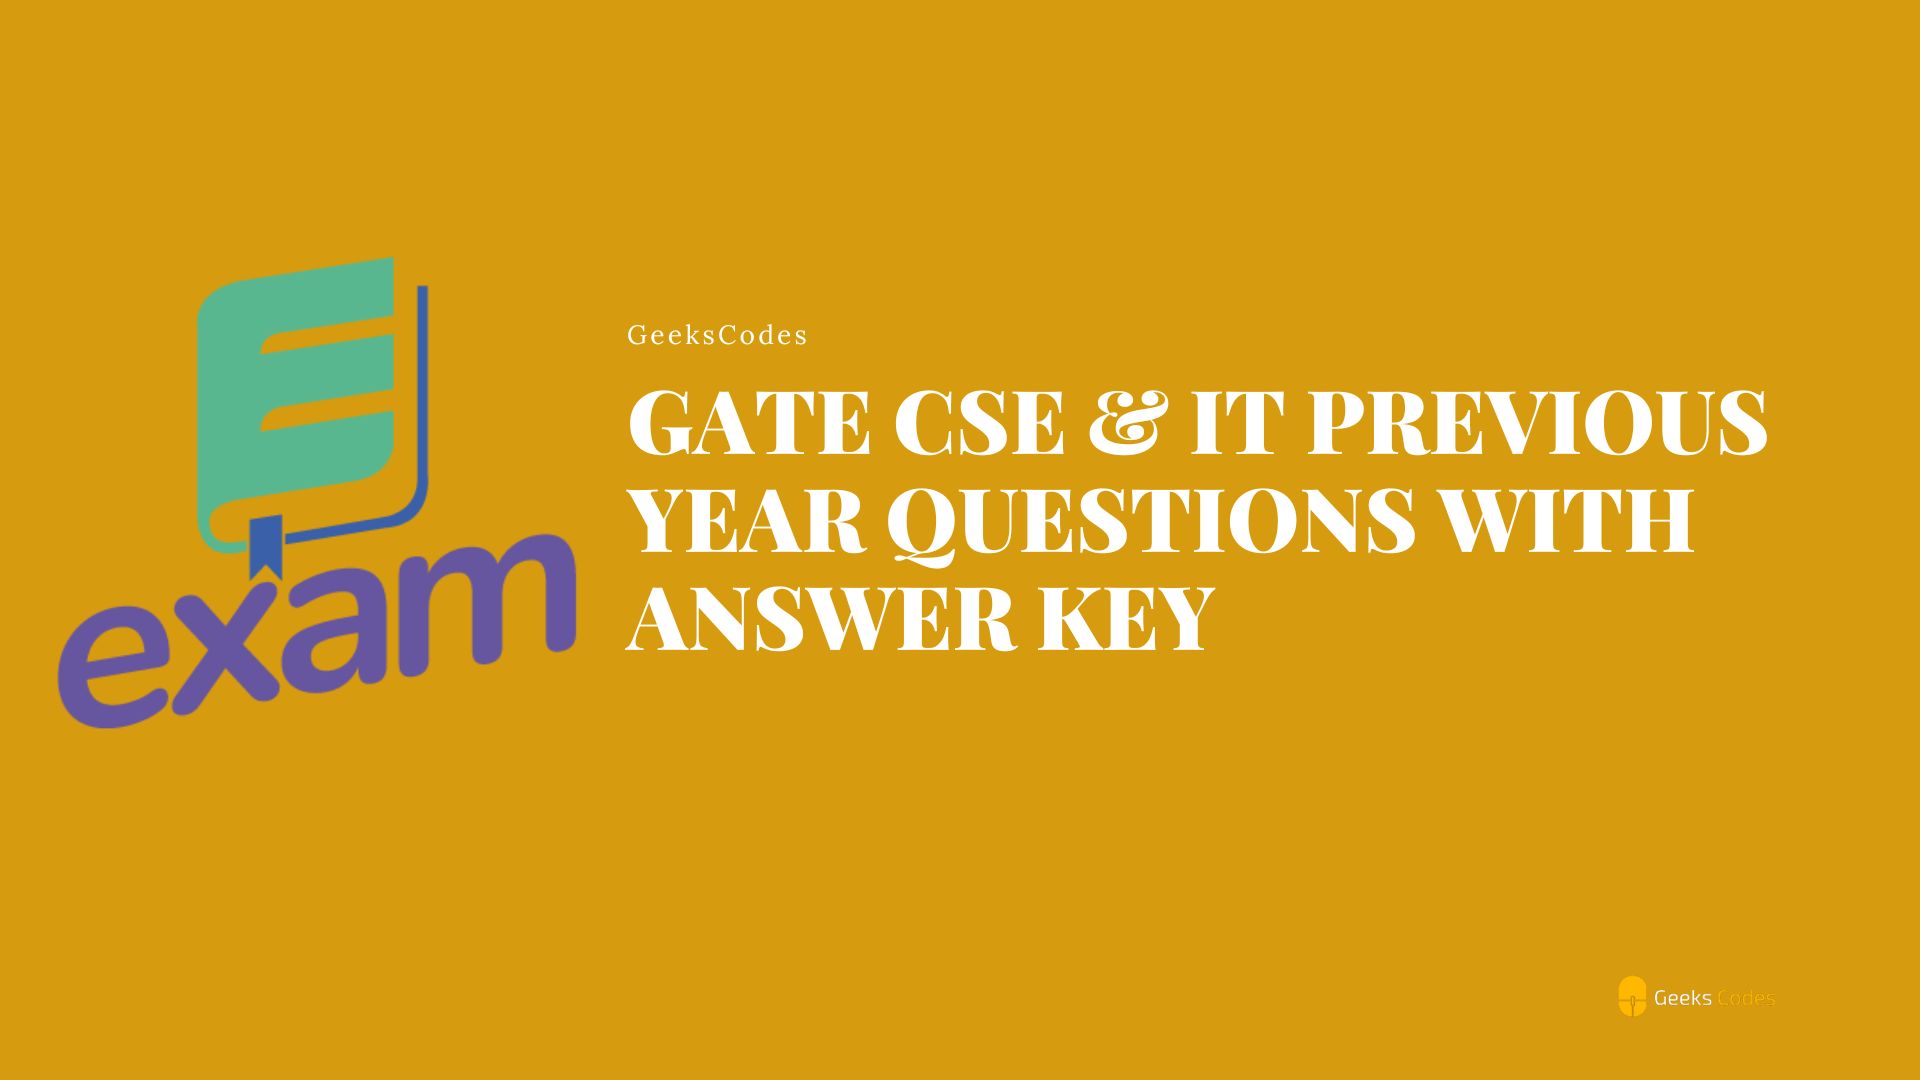 GATE CSE & IT Previous Year Questions With Answer Key